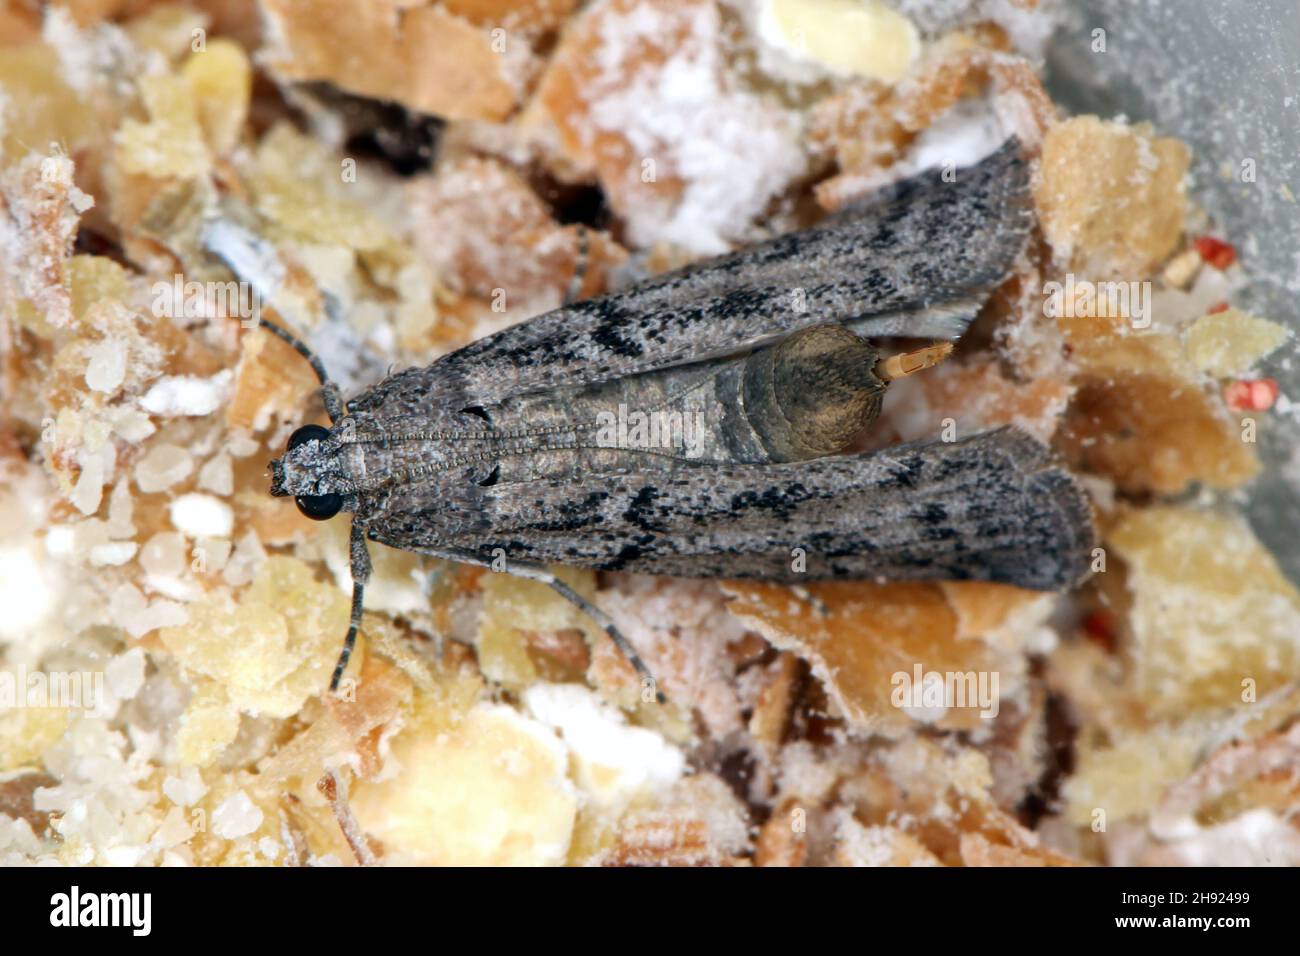 The Mediterranean flour moth or mill moth (Ephestia kuehniella) is a moth of the family Pyralidae. It is a common pest of cereal grains and products. Stock Photo